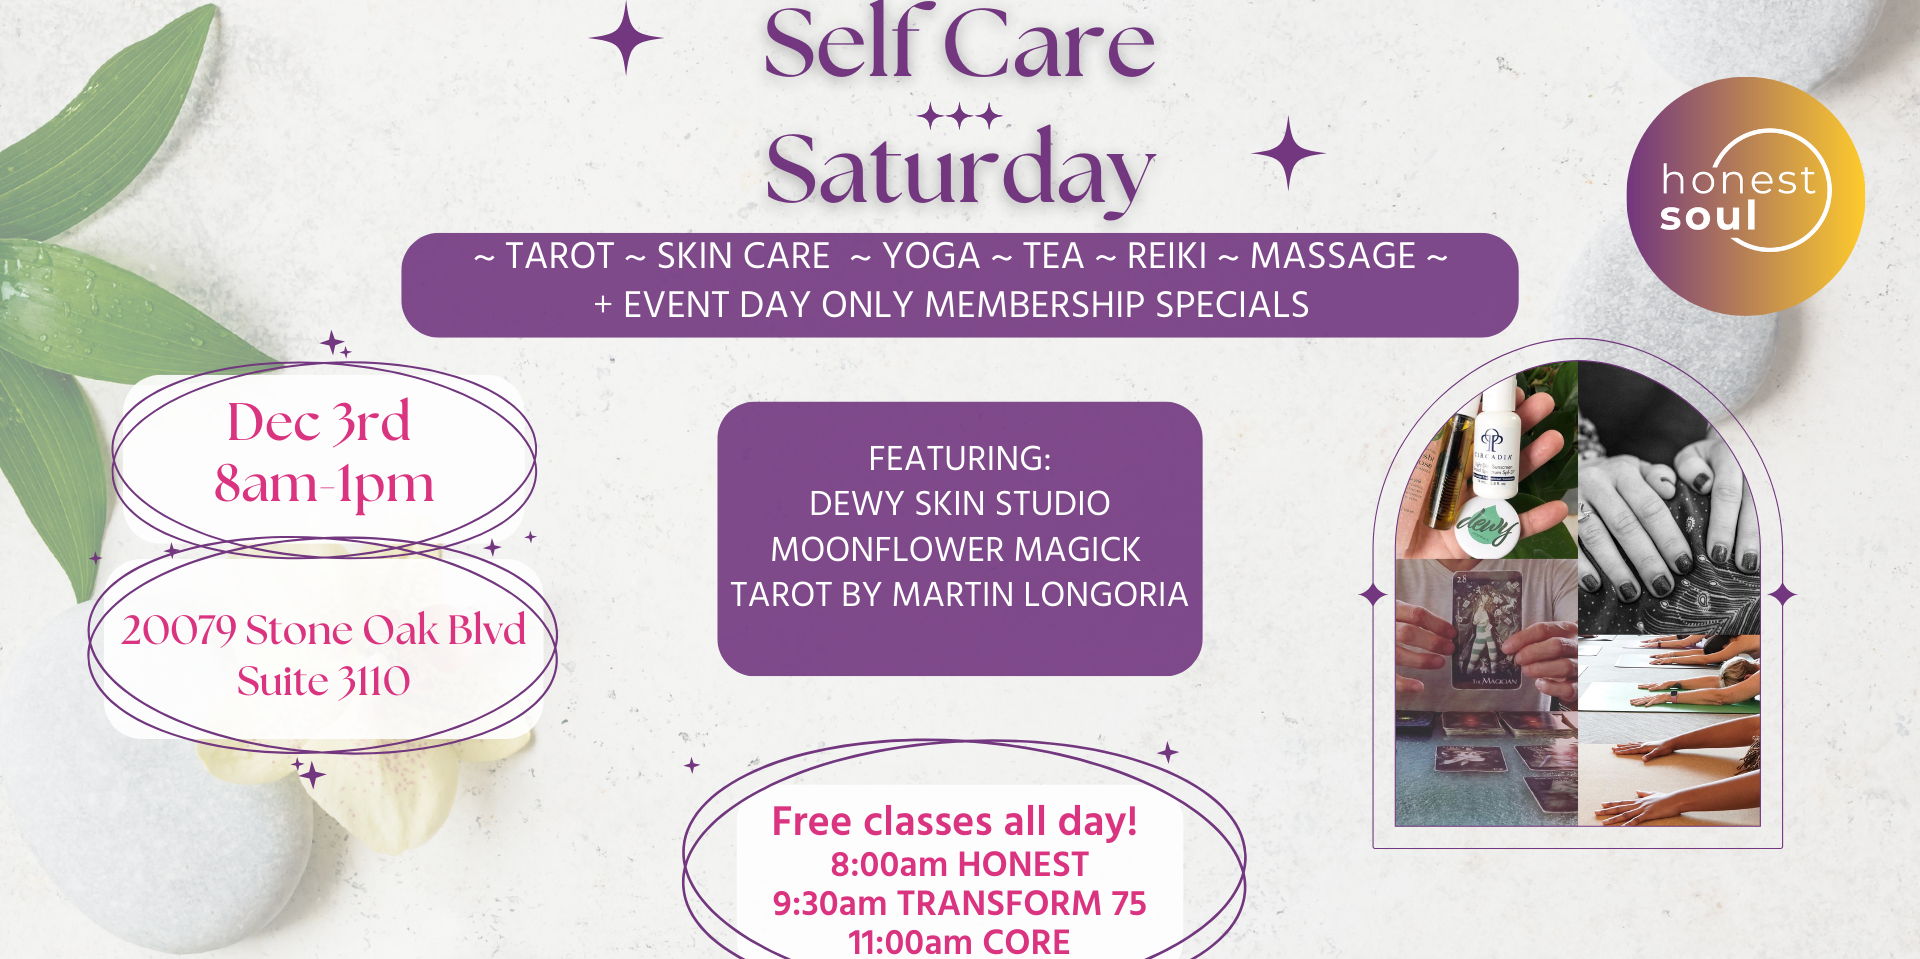 Self Care Saturday promotional image